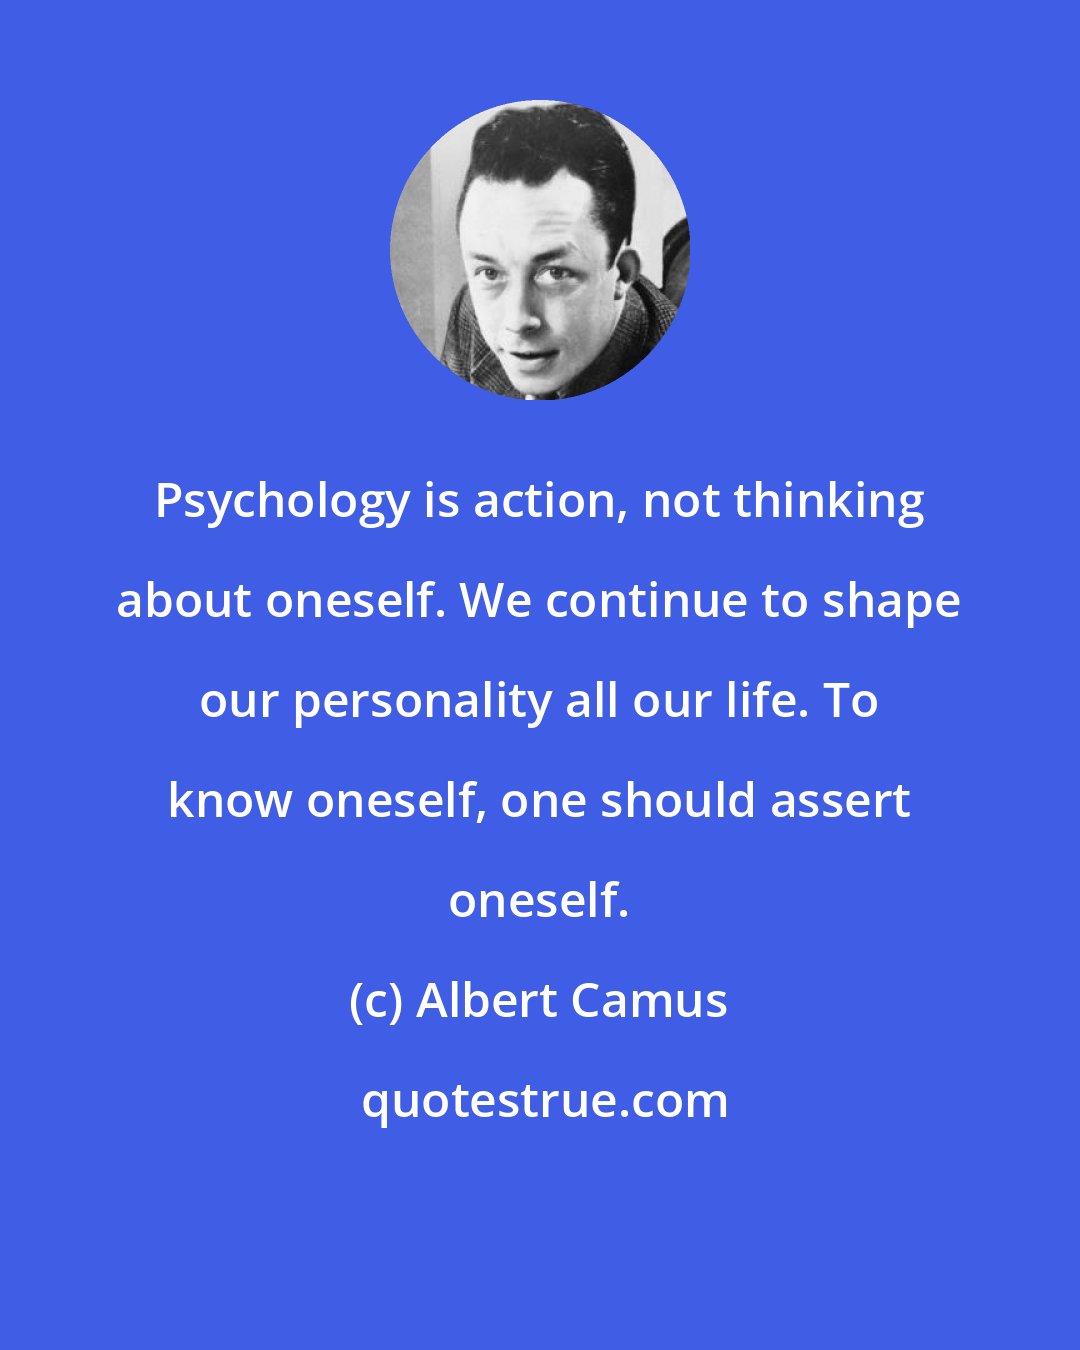 Albert Camus: Psychology is action, not thinking about oneself. We continue to shape our personality all our life. To know oneself, one should assert oneself.